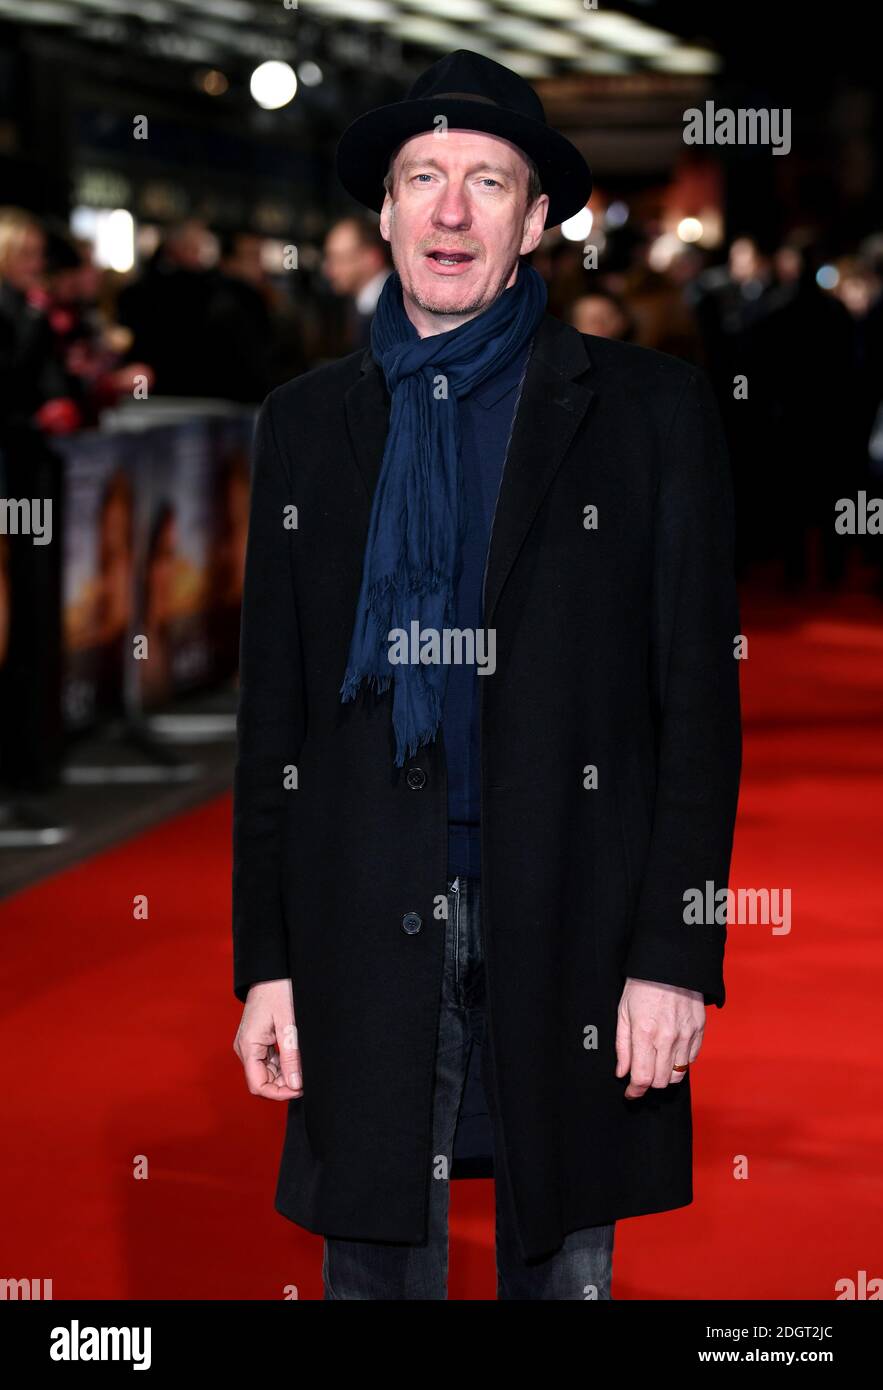 David Thewlis attending the Mercy premiere at the Curzon Mayfair cinema, London Stock Photo